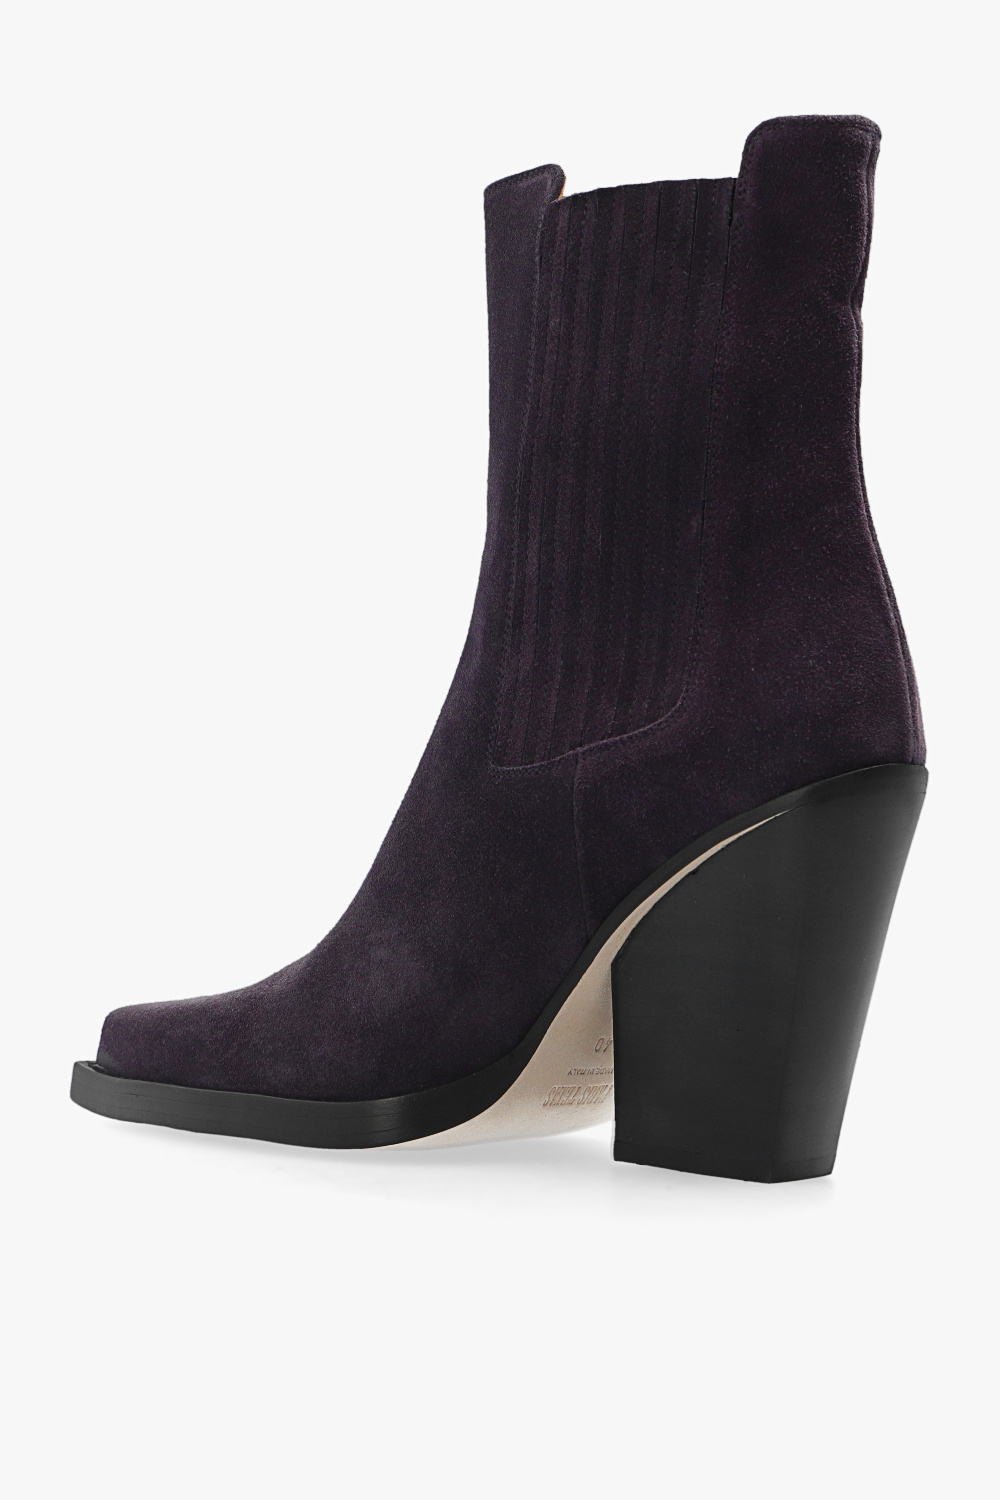 Paris Texas ‘Dallas’ suede heeled ankle boots